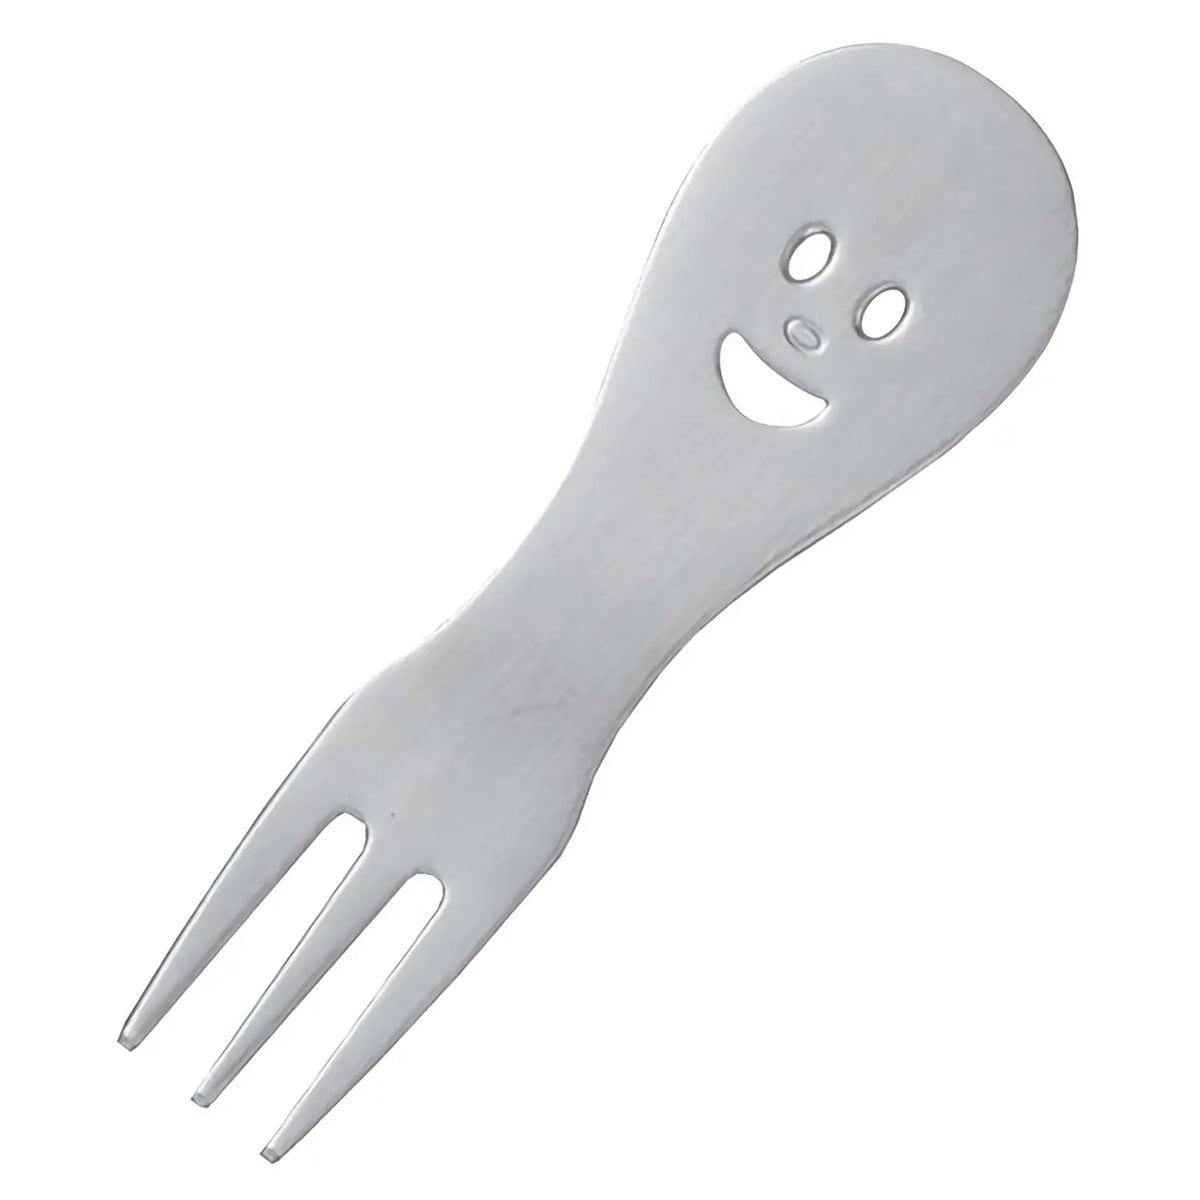 Wada Corporation Nico Stainless Steel Party Fork 9.5cm